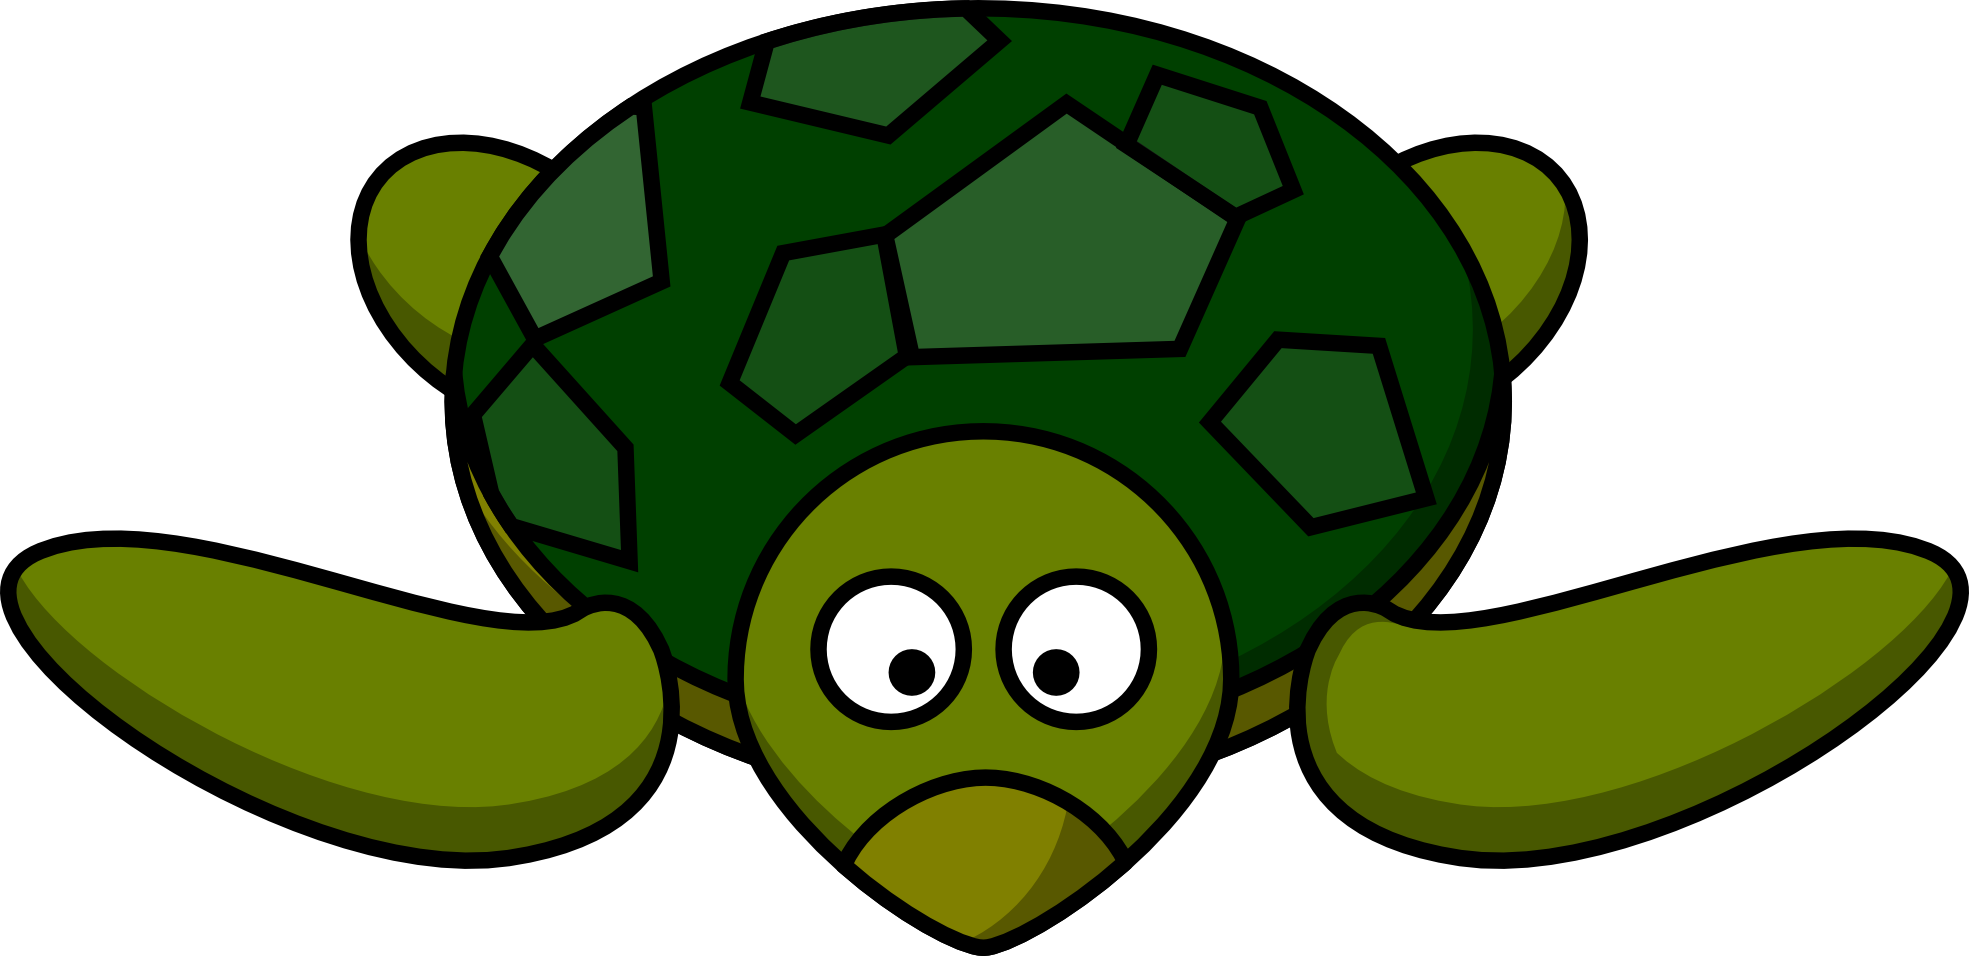 Cartoon Turtle Picture - Clipart library